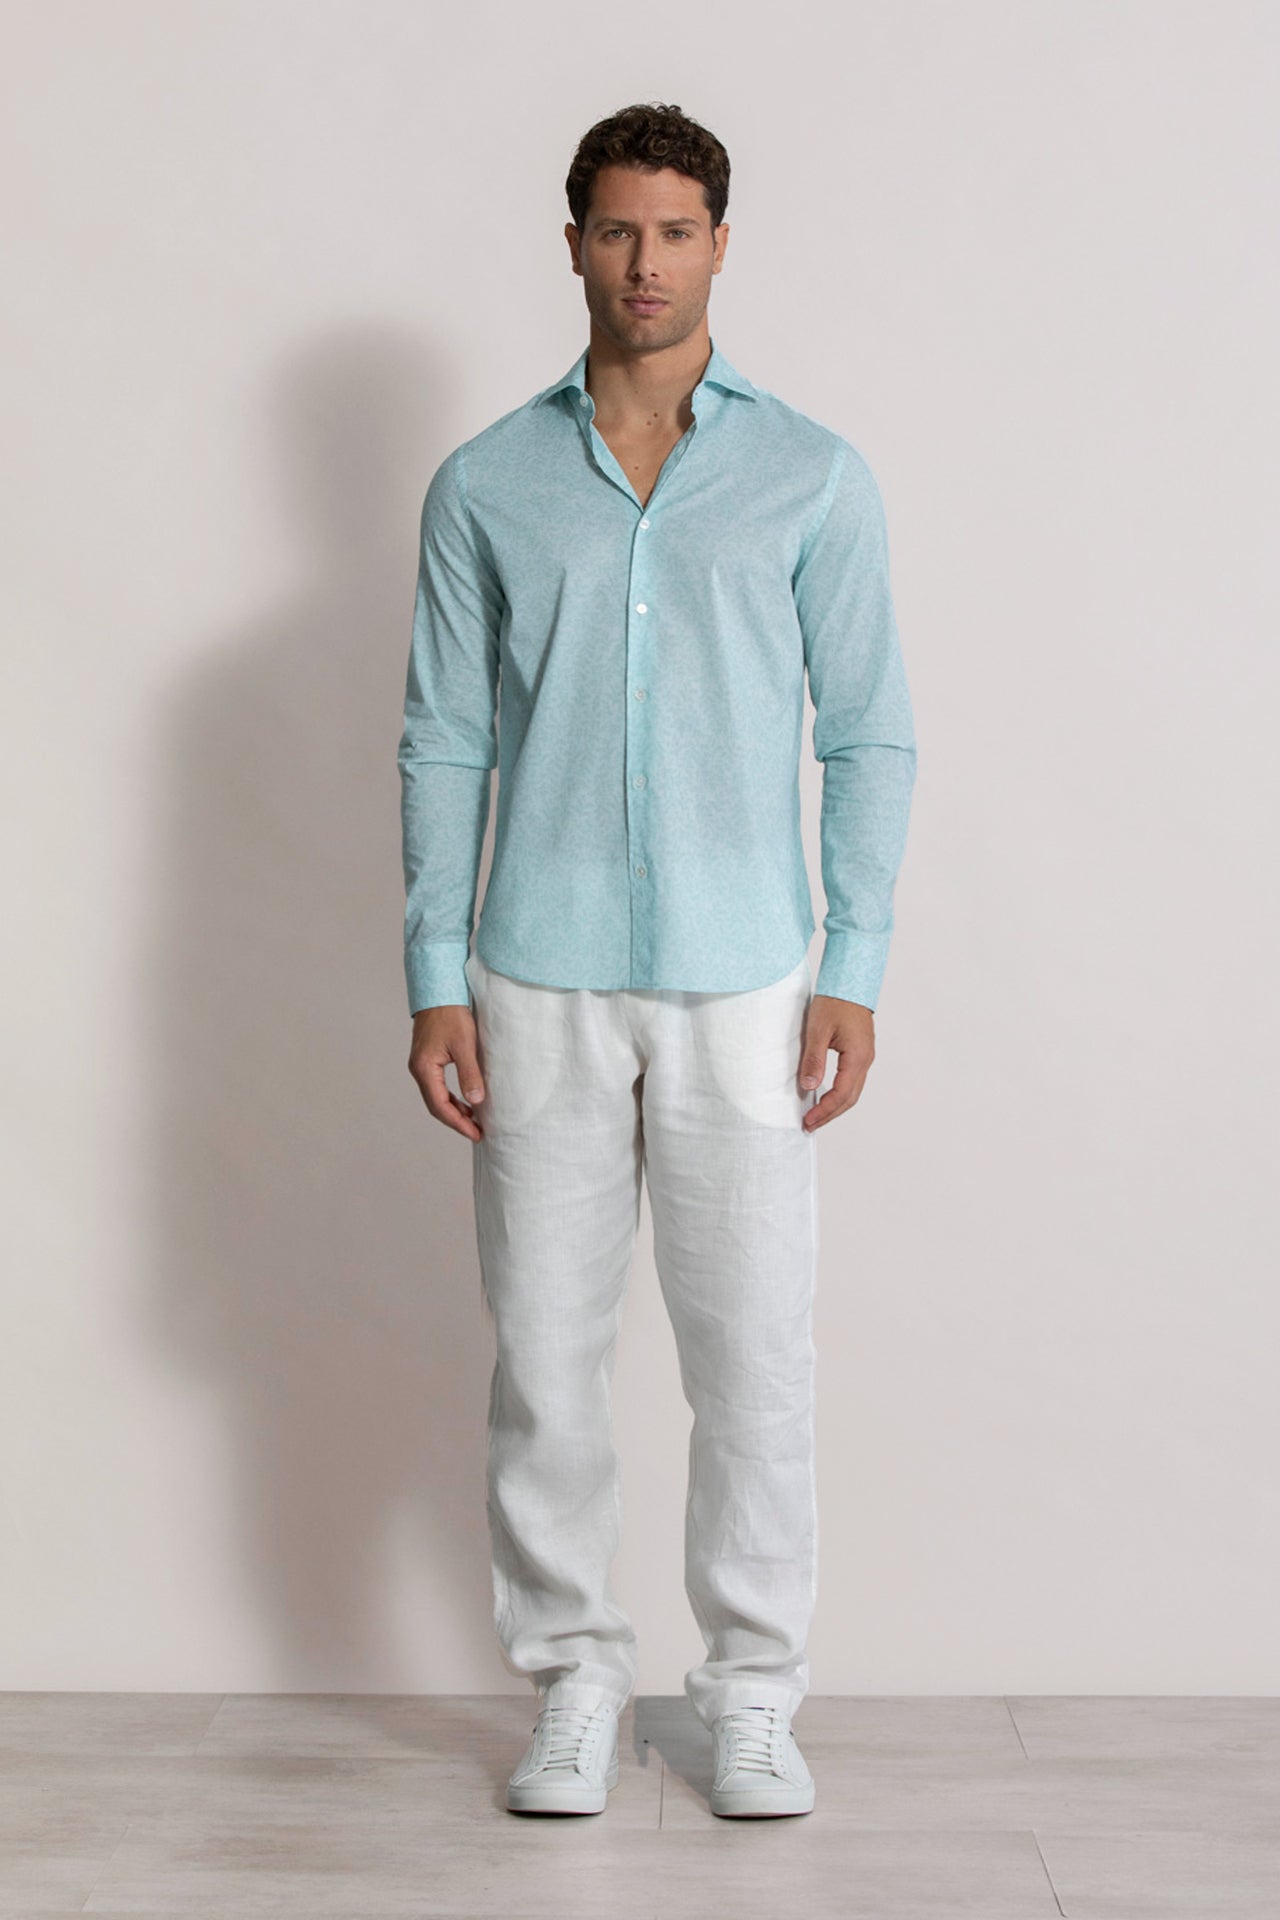 Sean stretch cotton voile printed shirt - feuille pattern